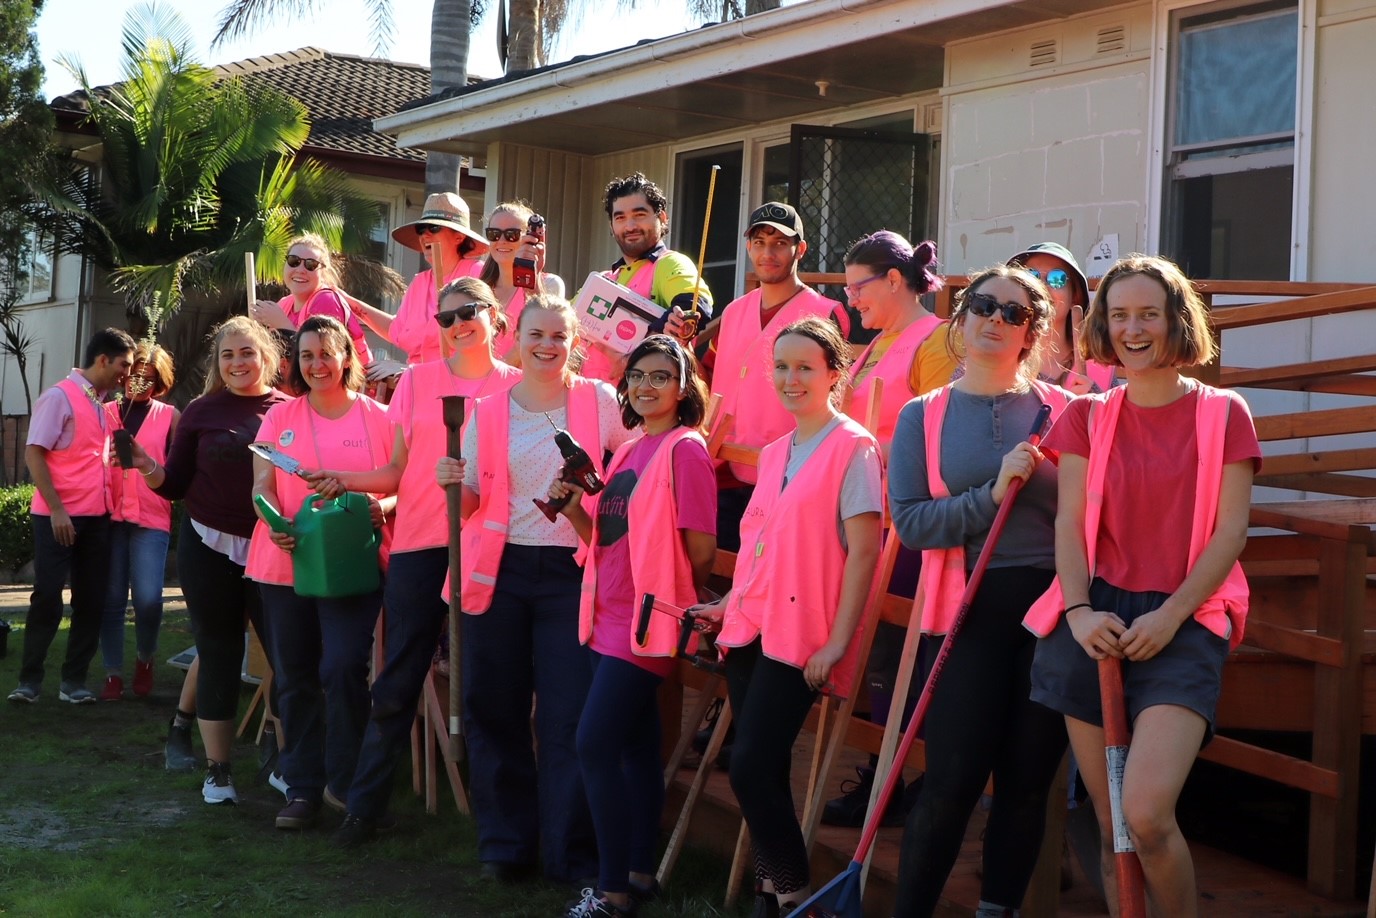 A group of people (mostly women) in a yard, wearing neon pink vests and holding power tools or gardening equipment.